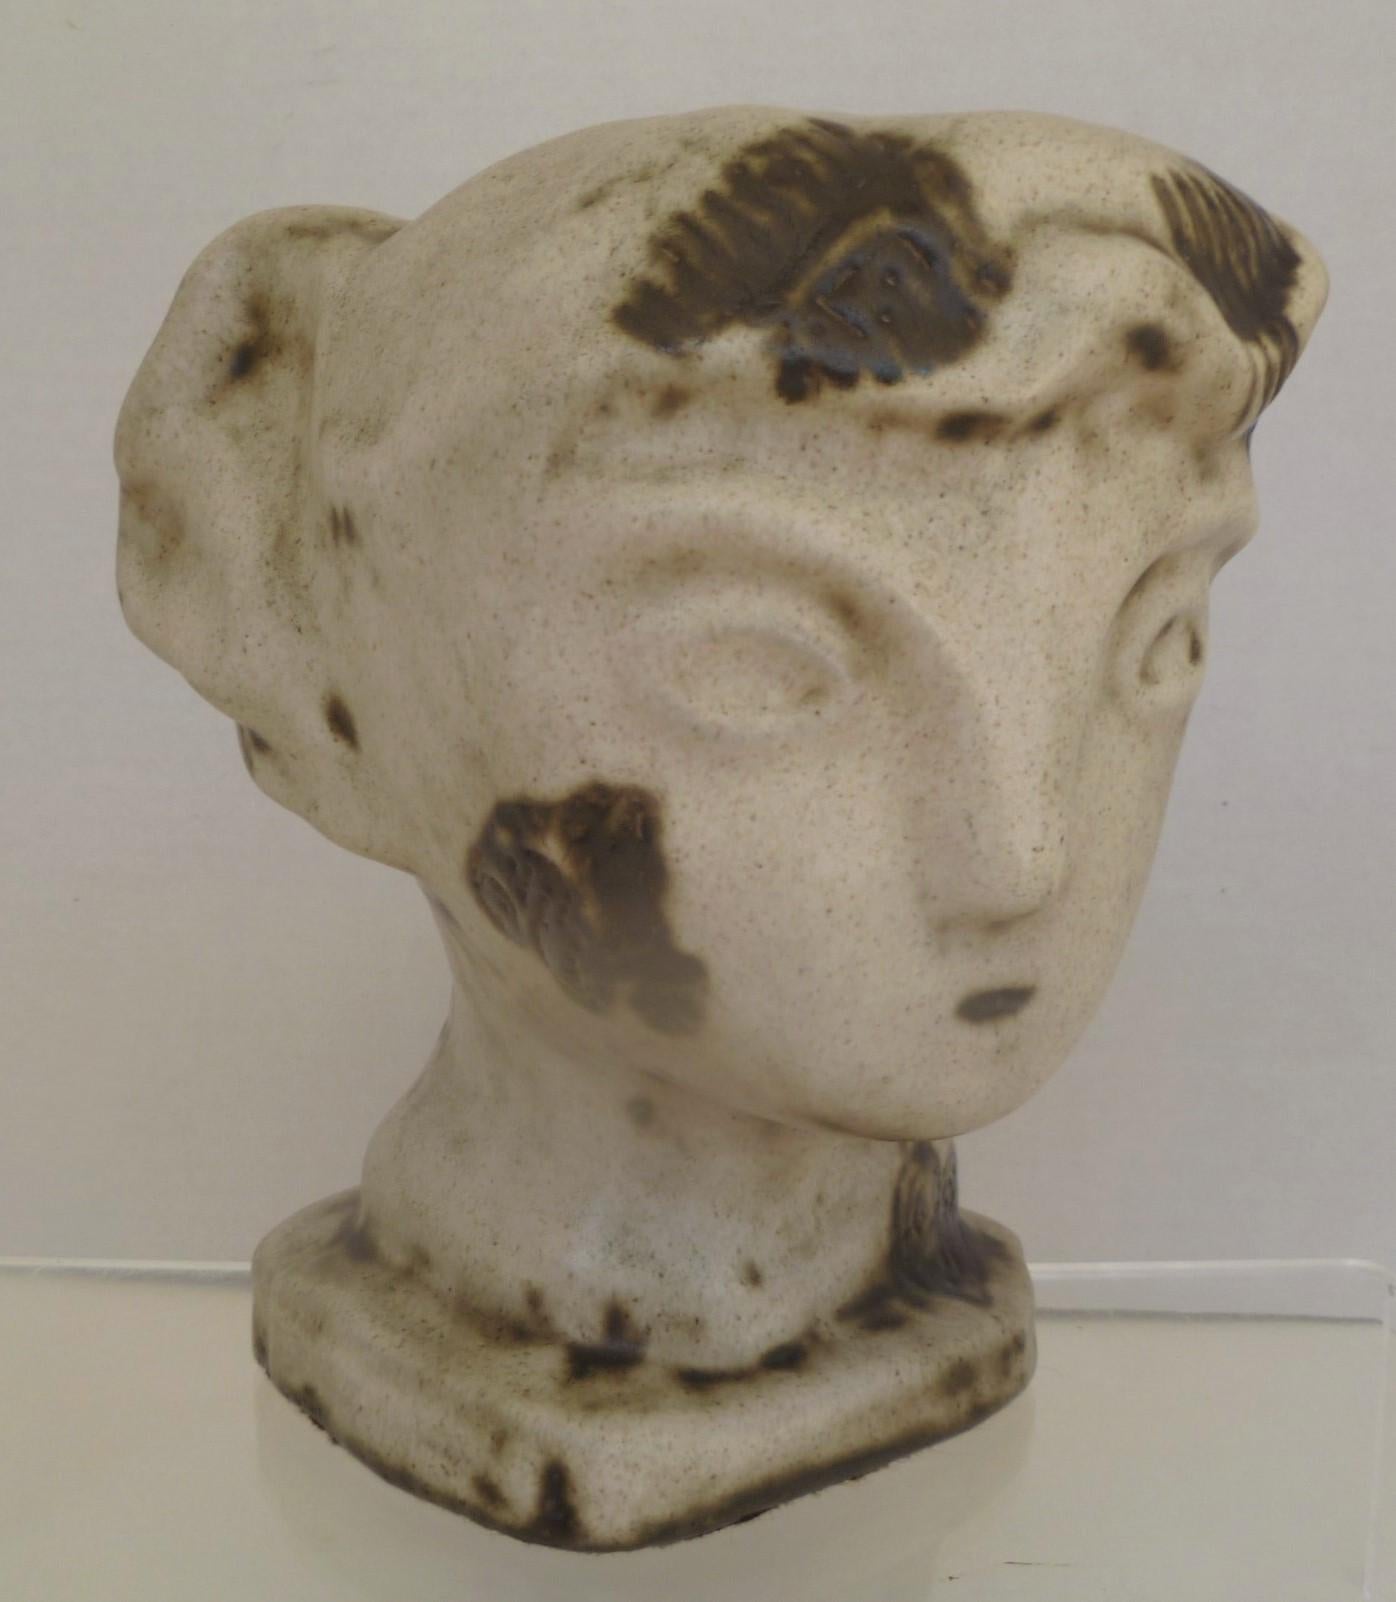 A rare and unique head sculpture from artist Marianna von Allesch. The depiction, a woman, brings to mind early Greek and Minoan forms. This head sculpture is approximately 8 inches tall and about 7 inches in diameter around the top of the head. A